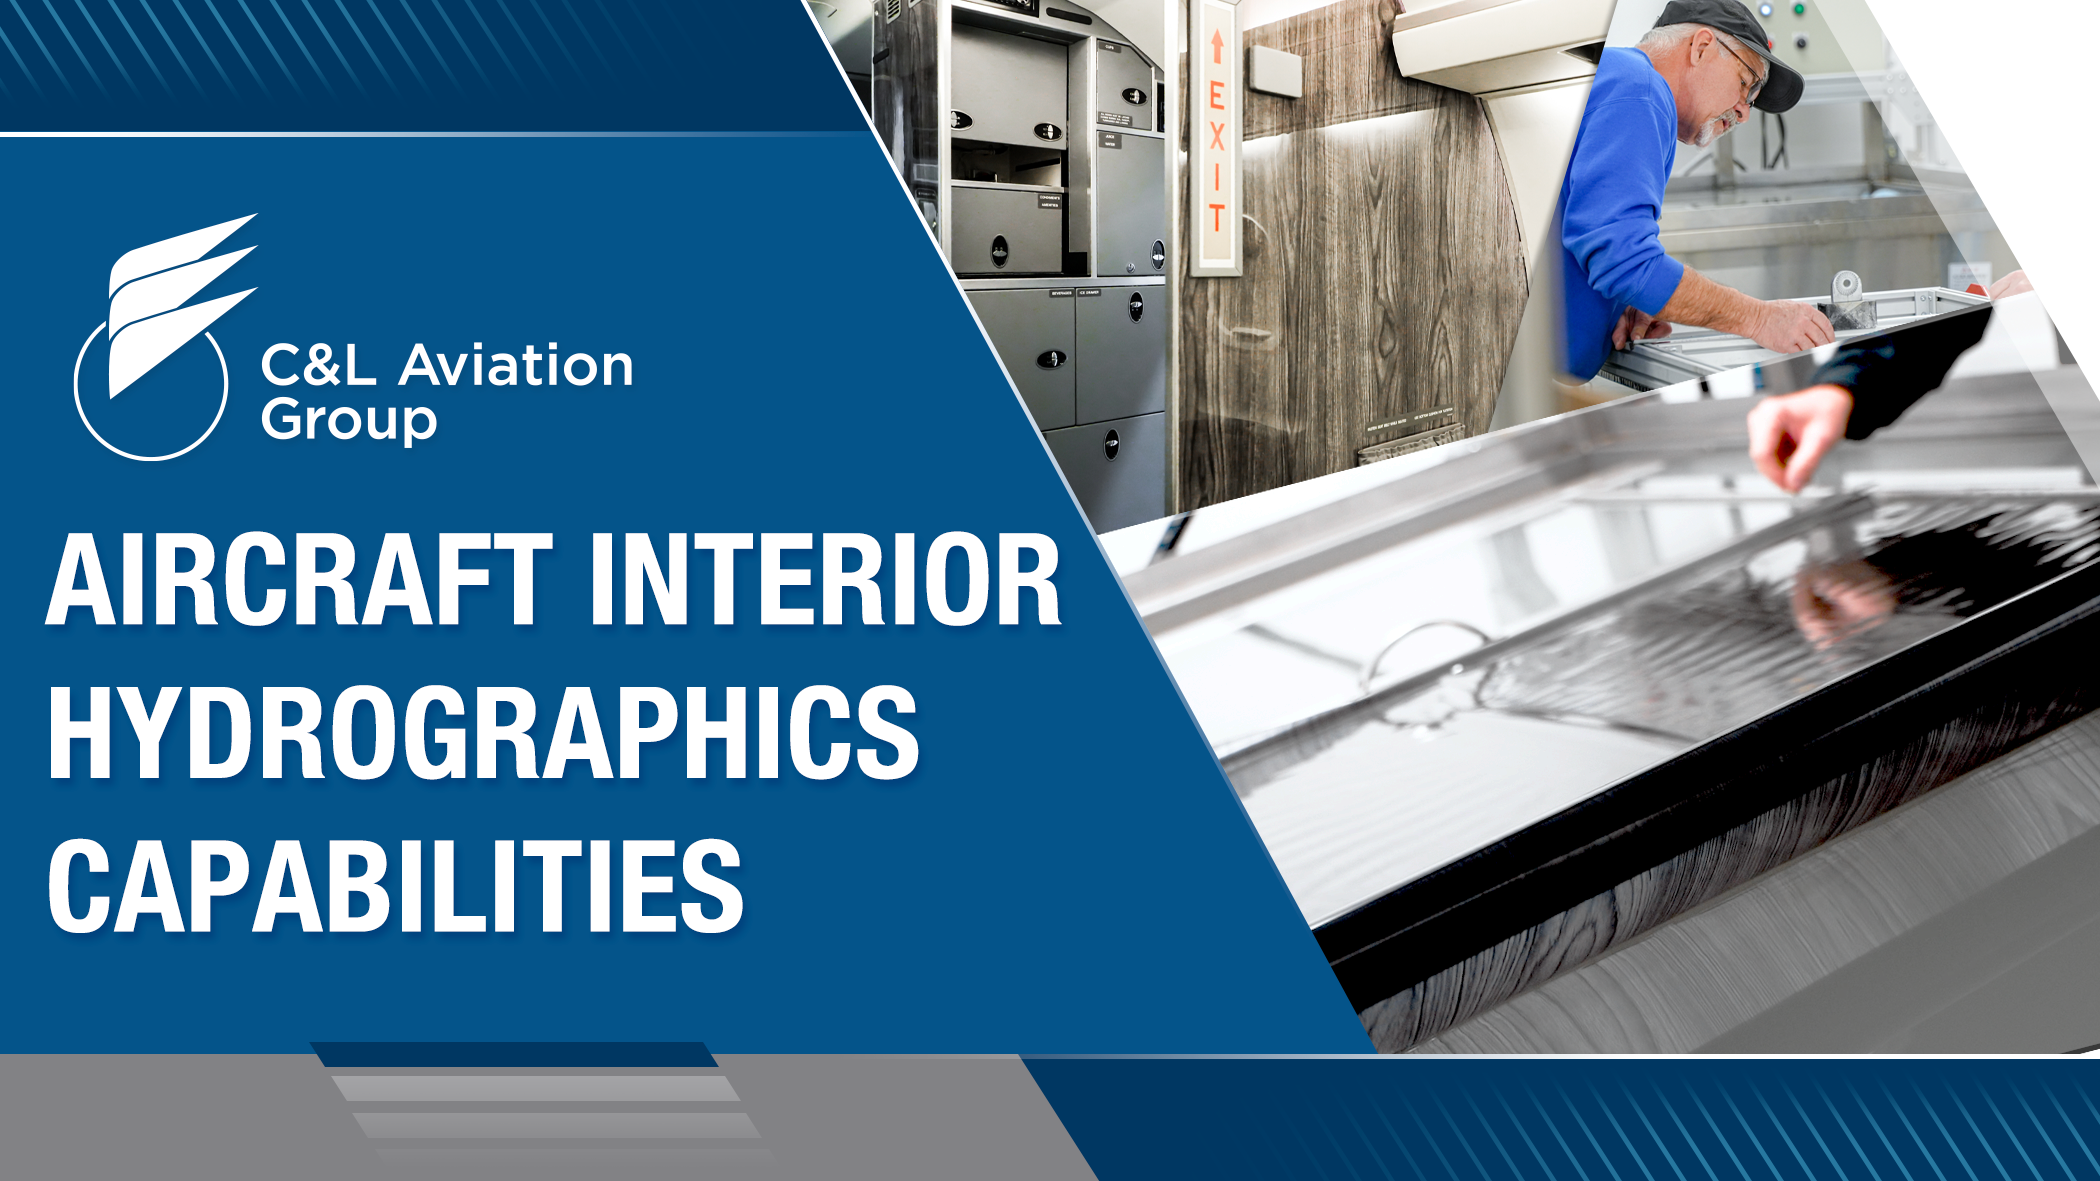 C&L Aviation Group - Aircraft Interior Hydrographics Capabilities